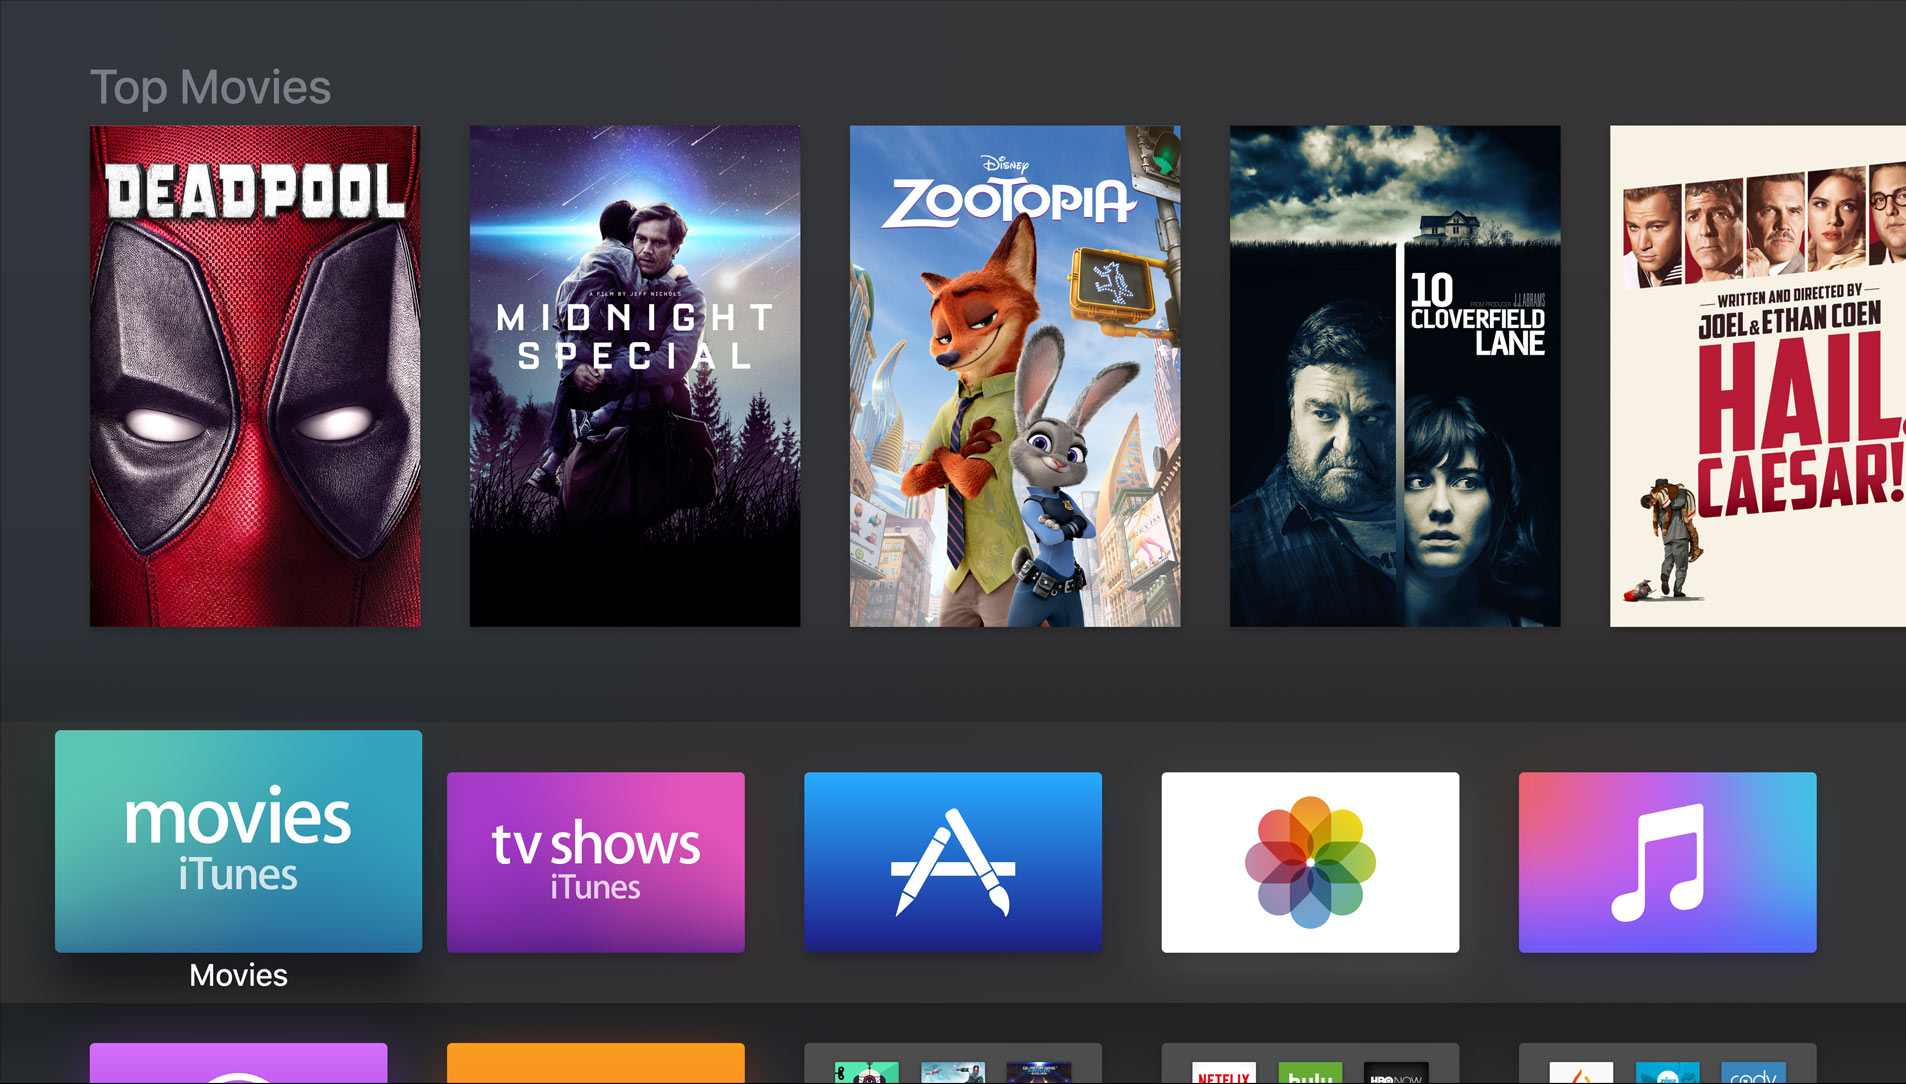 And Apple has also released tvOS 10 to all fourth generation Apple TV owners! [atualizado]